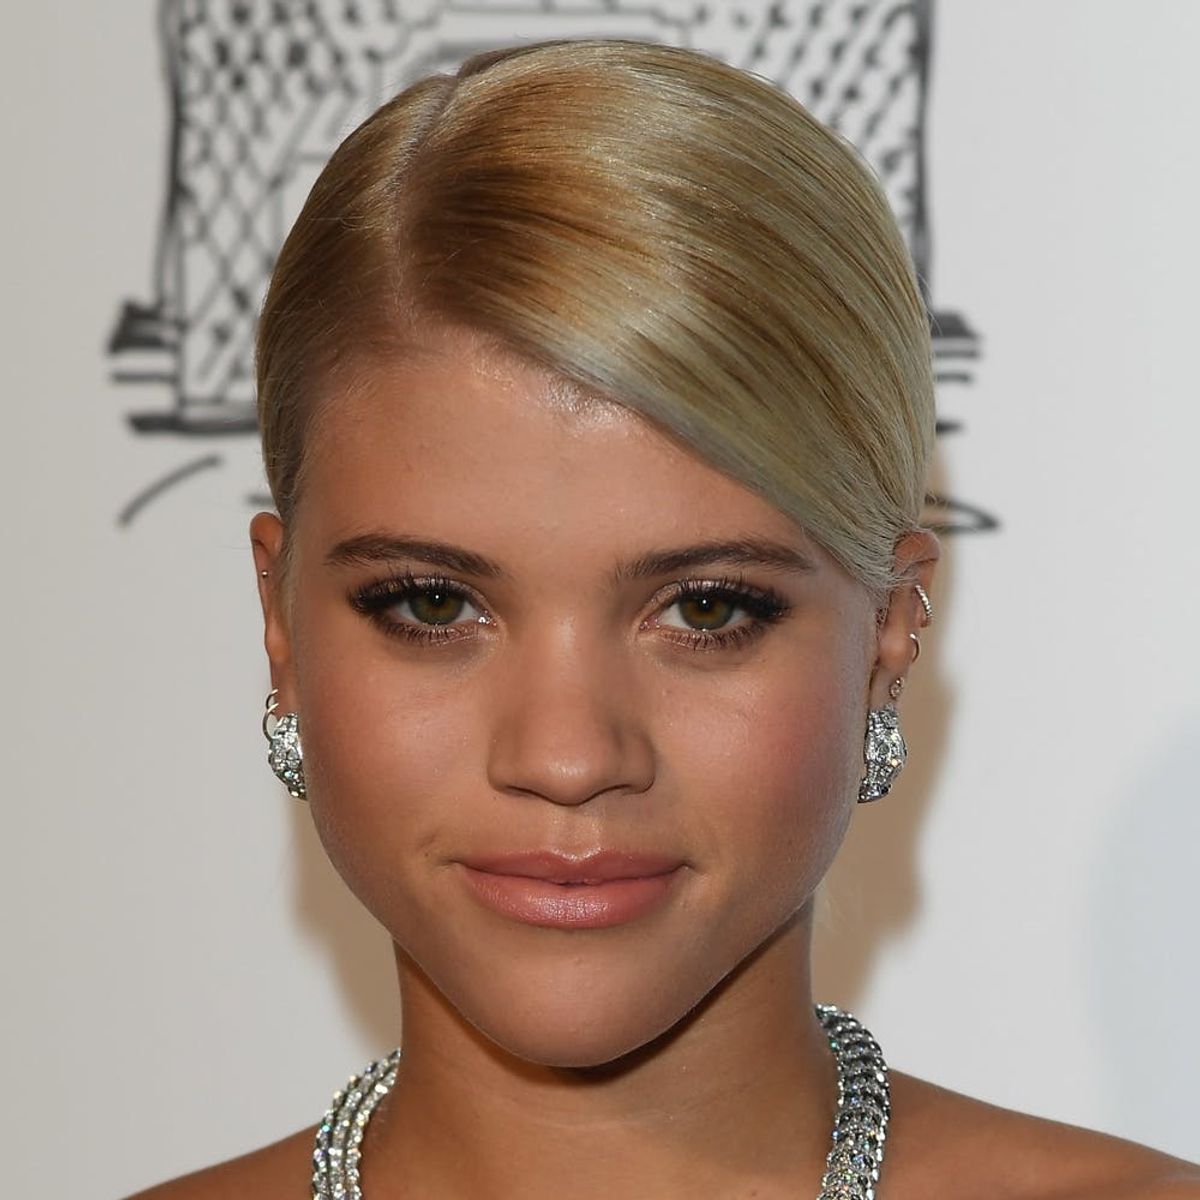 Sofia Richie Proves Diamonds *Are* a Girl’s Best Friend With Her Style Homage to Marilyn Monroe